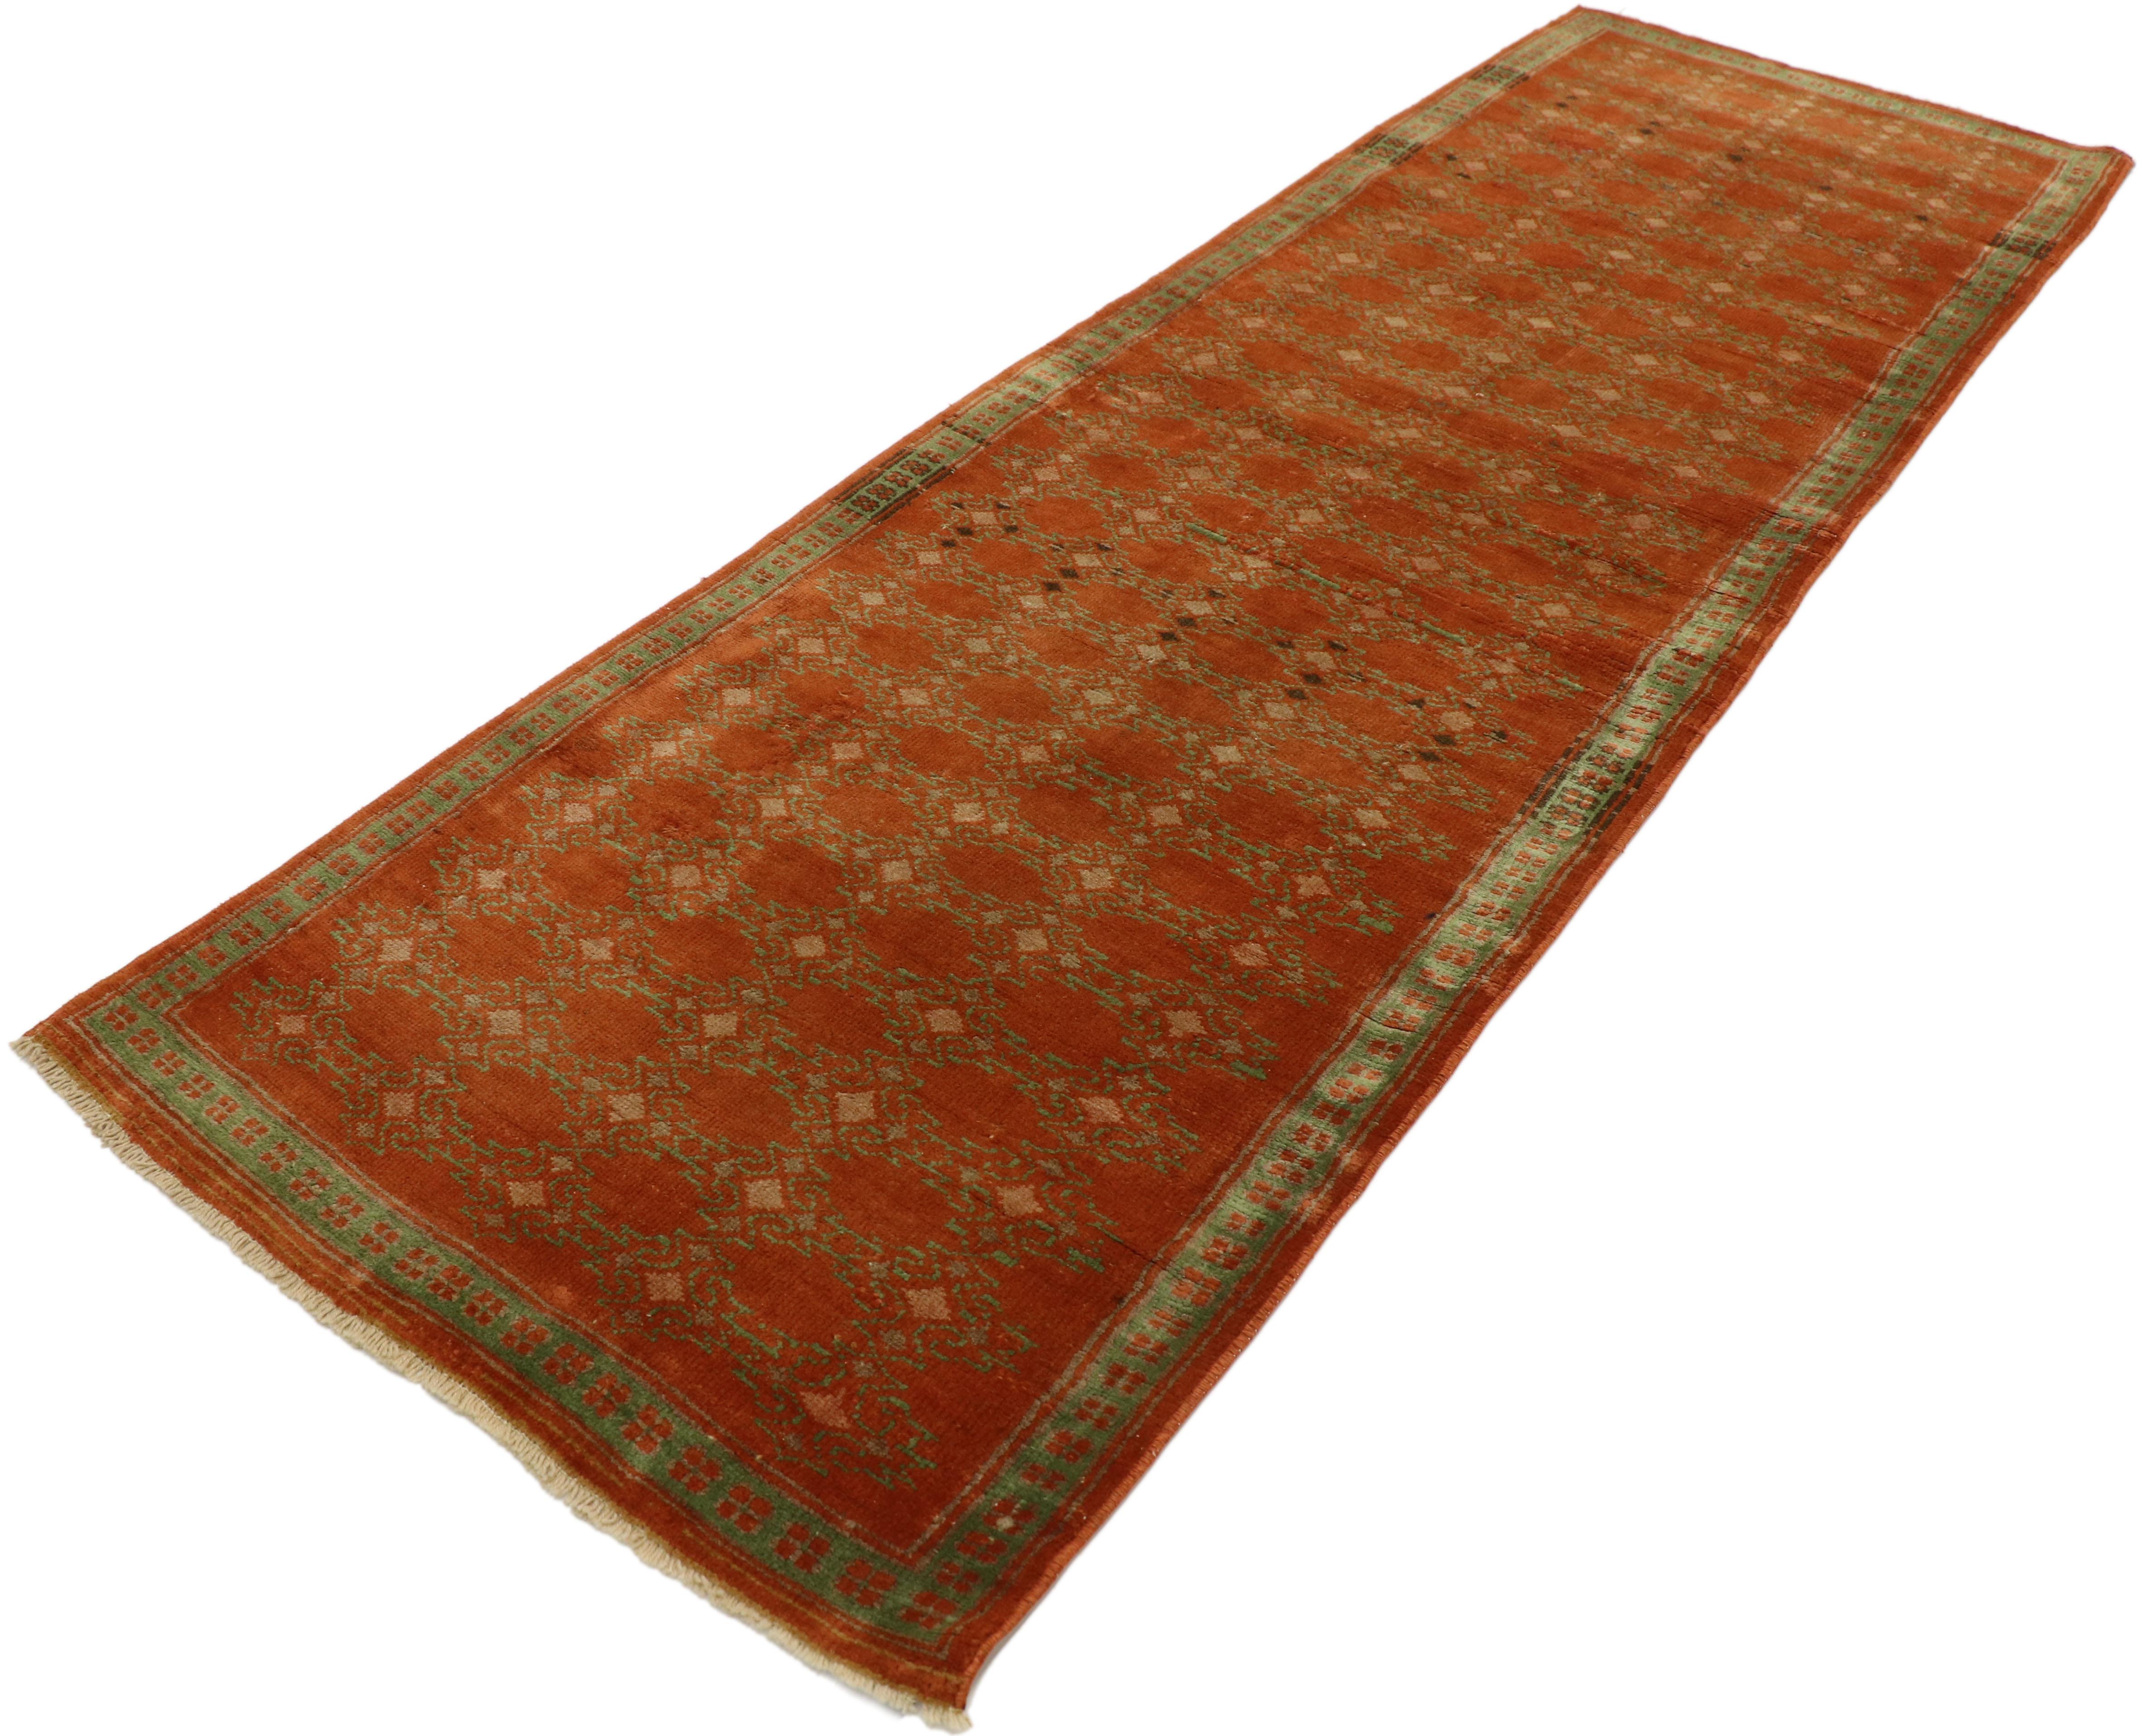 53215 Vintage Turkish Oushak Runner with Elizabethan Medieval style. Rich in detail with a traditional feel and well-balanced symmetry, this hand knotted wool vintage Turkish Oushak runner beautifully embodies an Elizabethan Medieval style. The